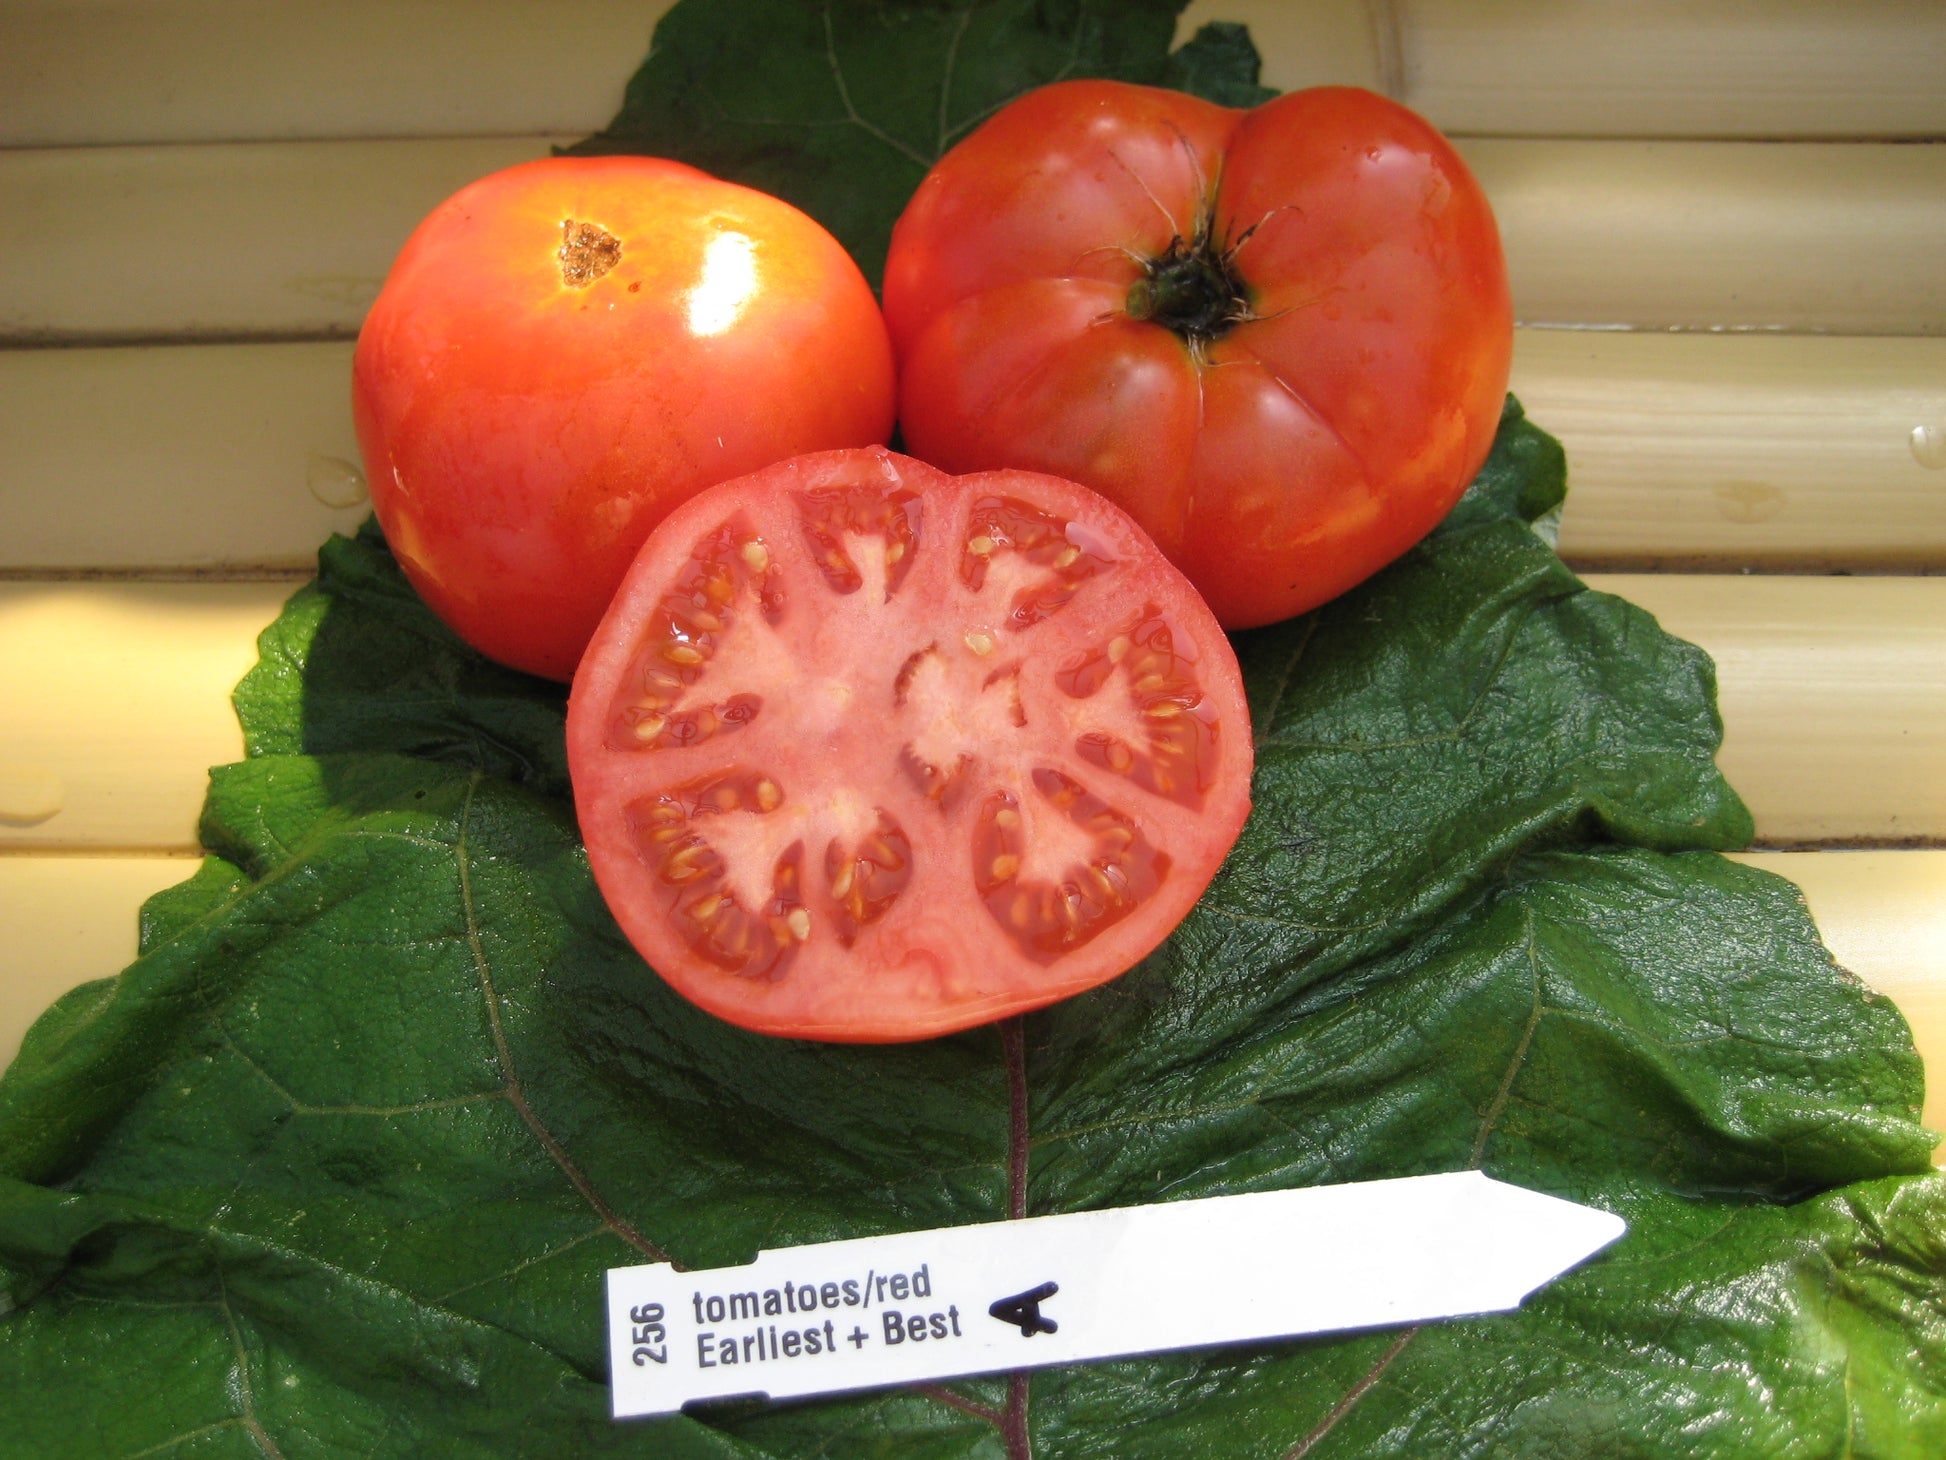 Burgess' Earliest and Best Tomato